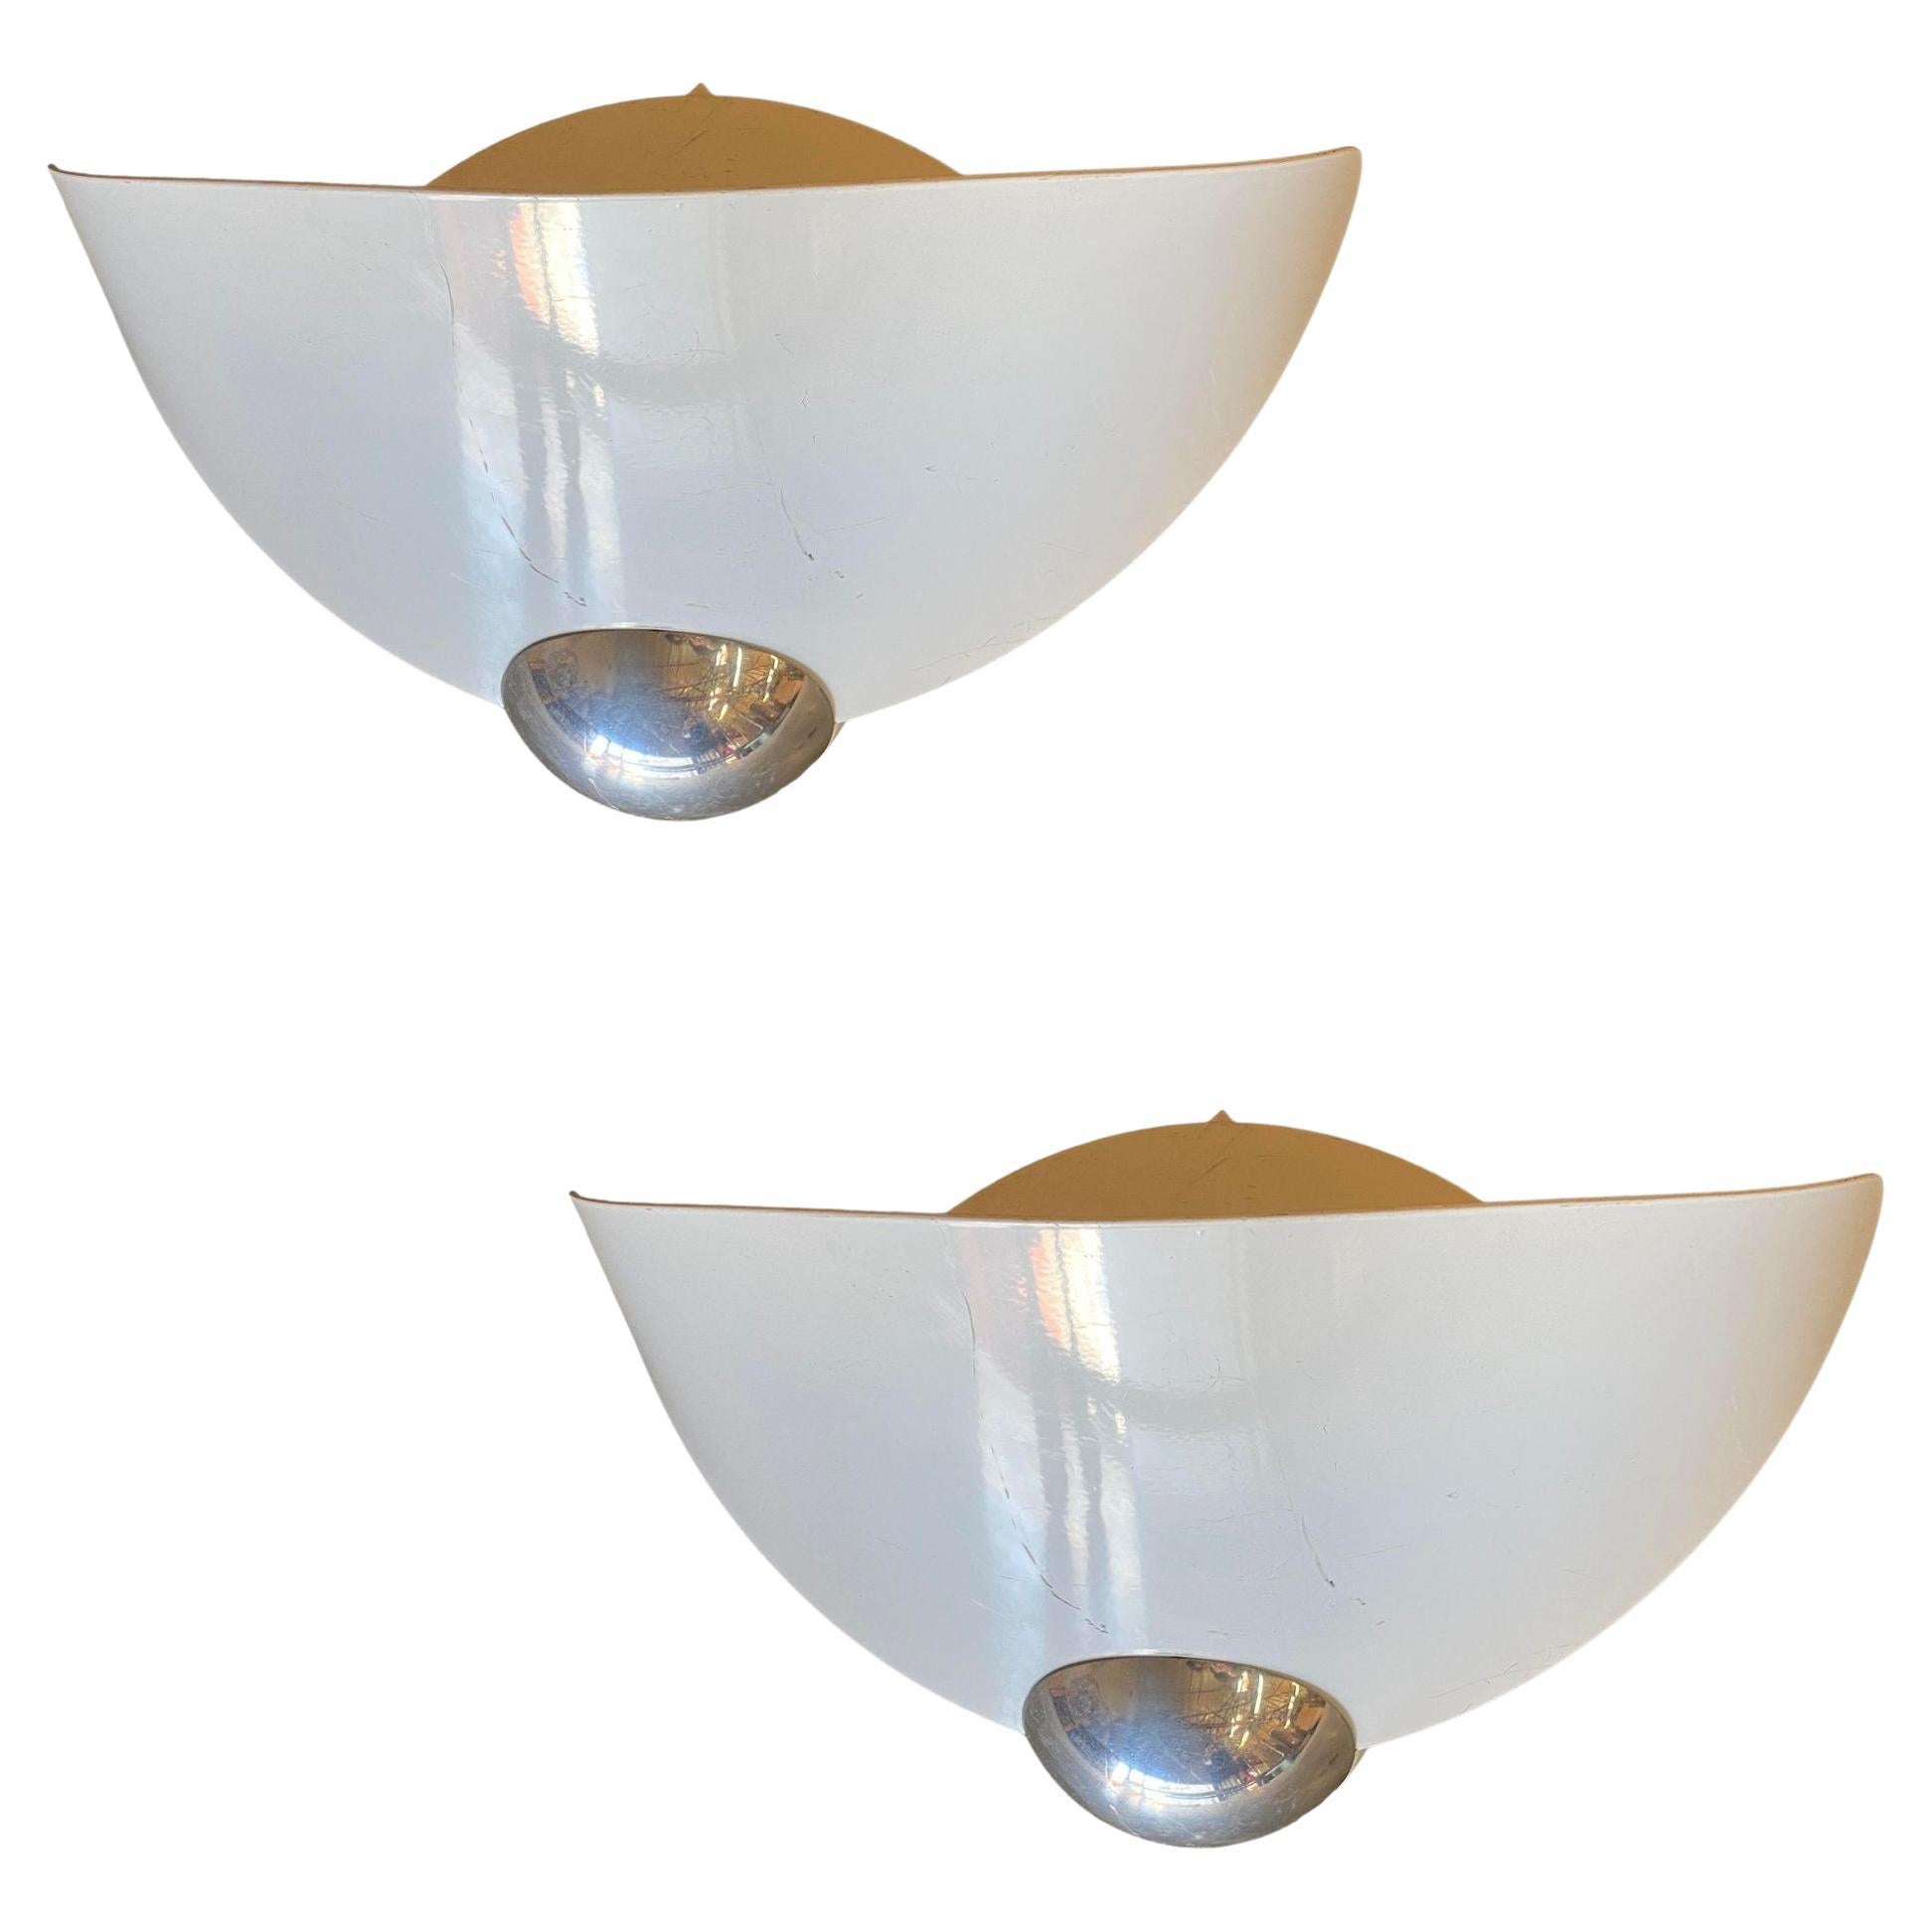 Memphis Inspired Enbamaled Steel and Chrome Wall Sconce, Pair